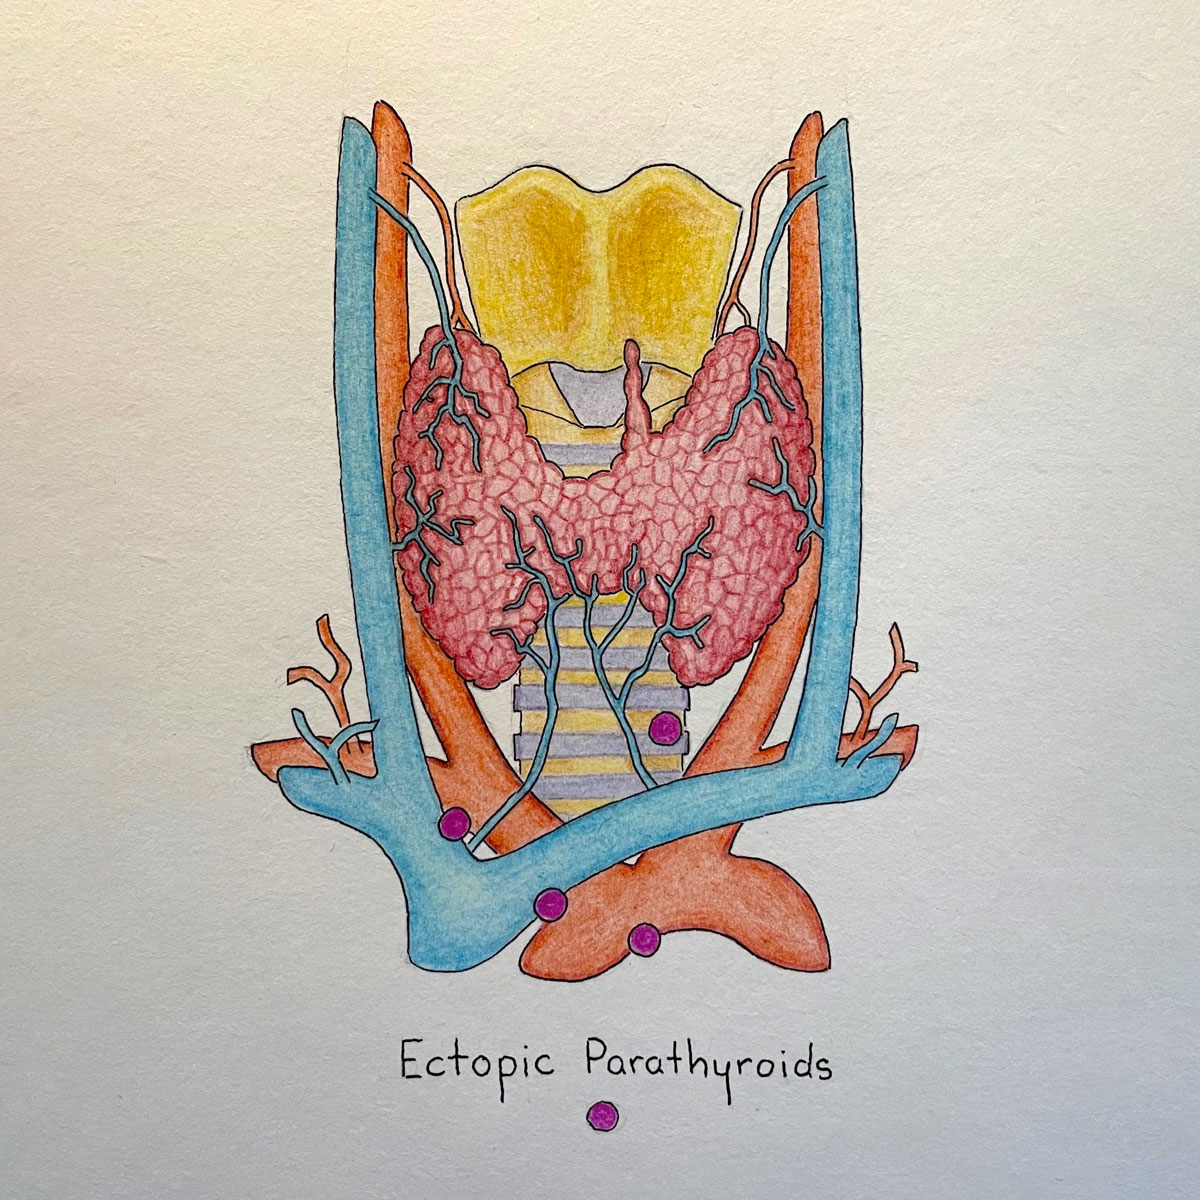 Colour anatomical illustration showing location of ectopic parathyroids